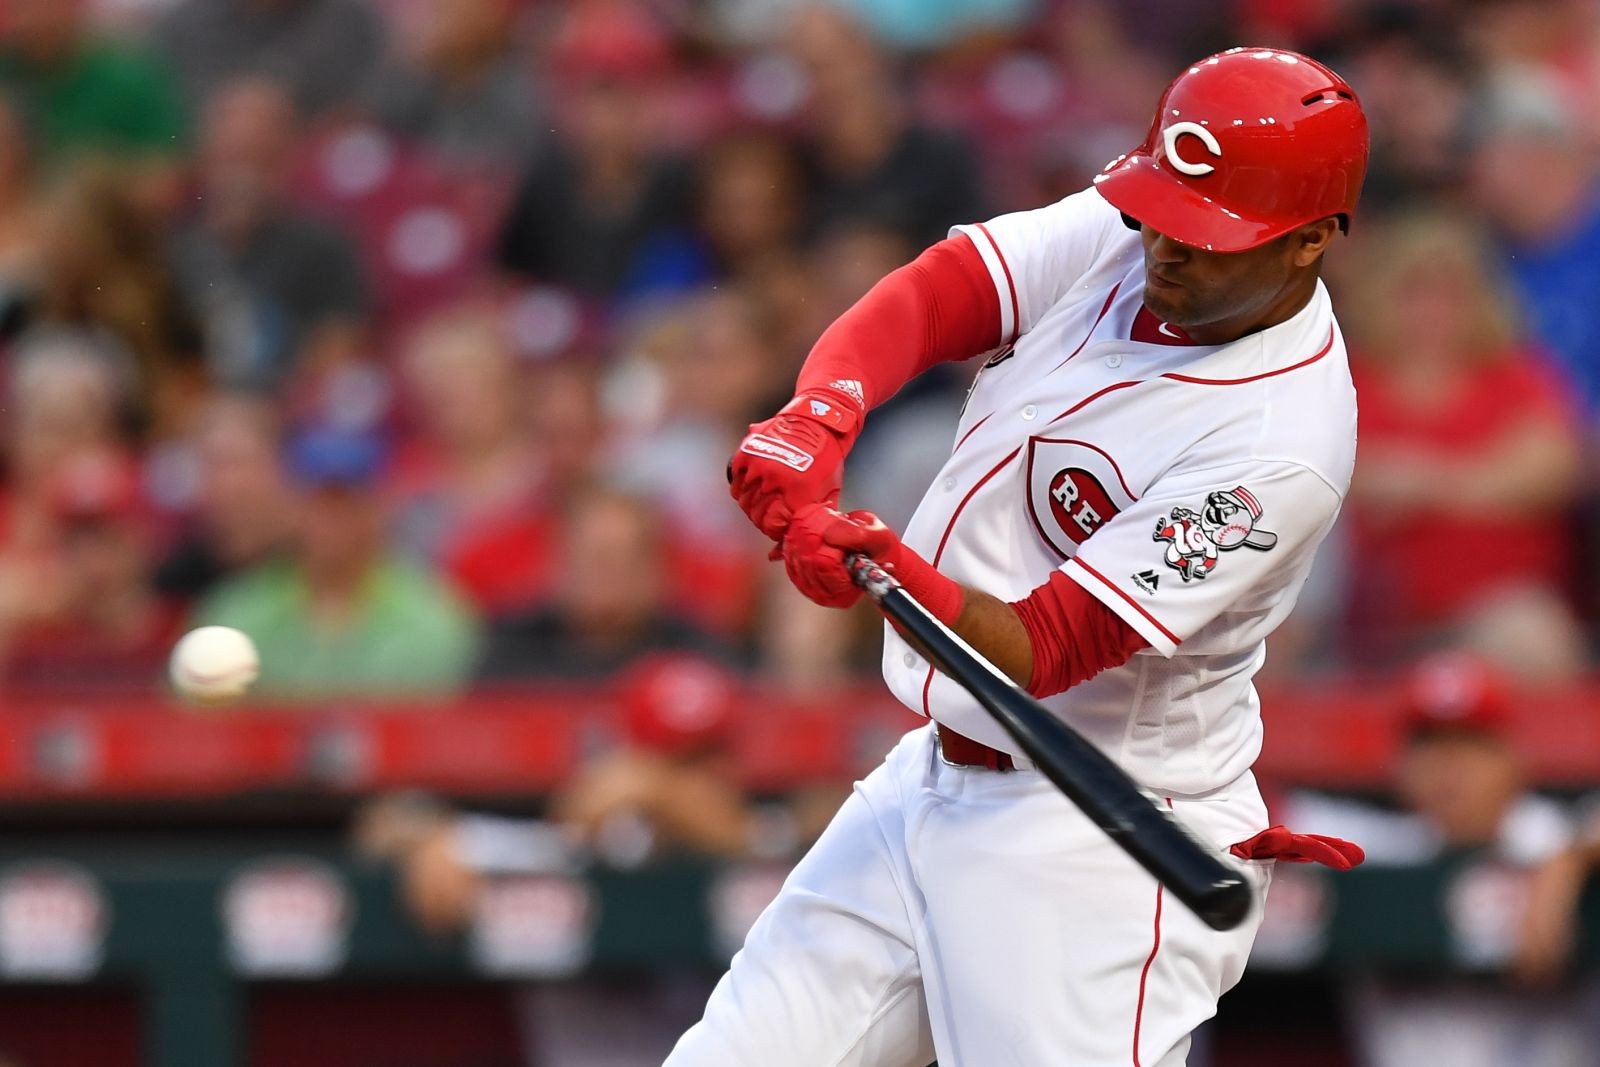 Cincinnati Reds: Mason Williams making case to stay in the Major Leagues